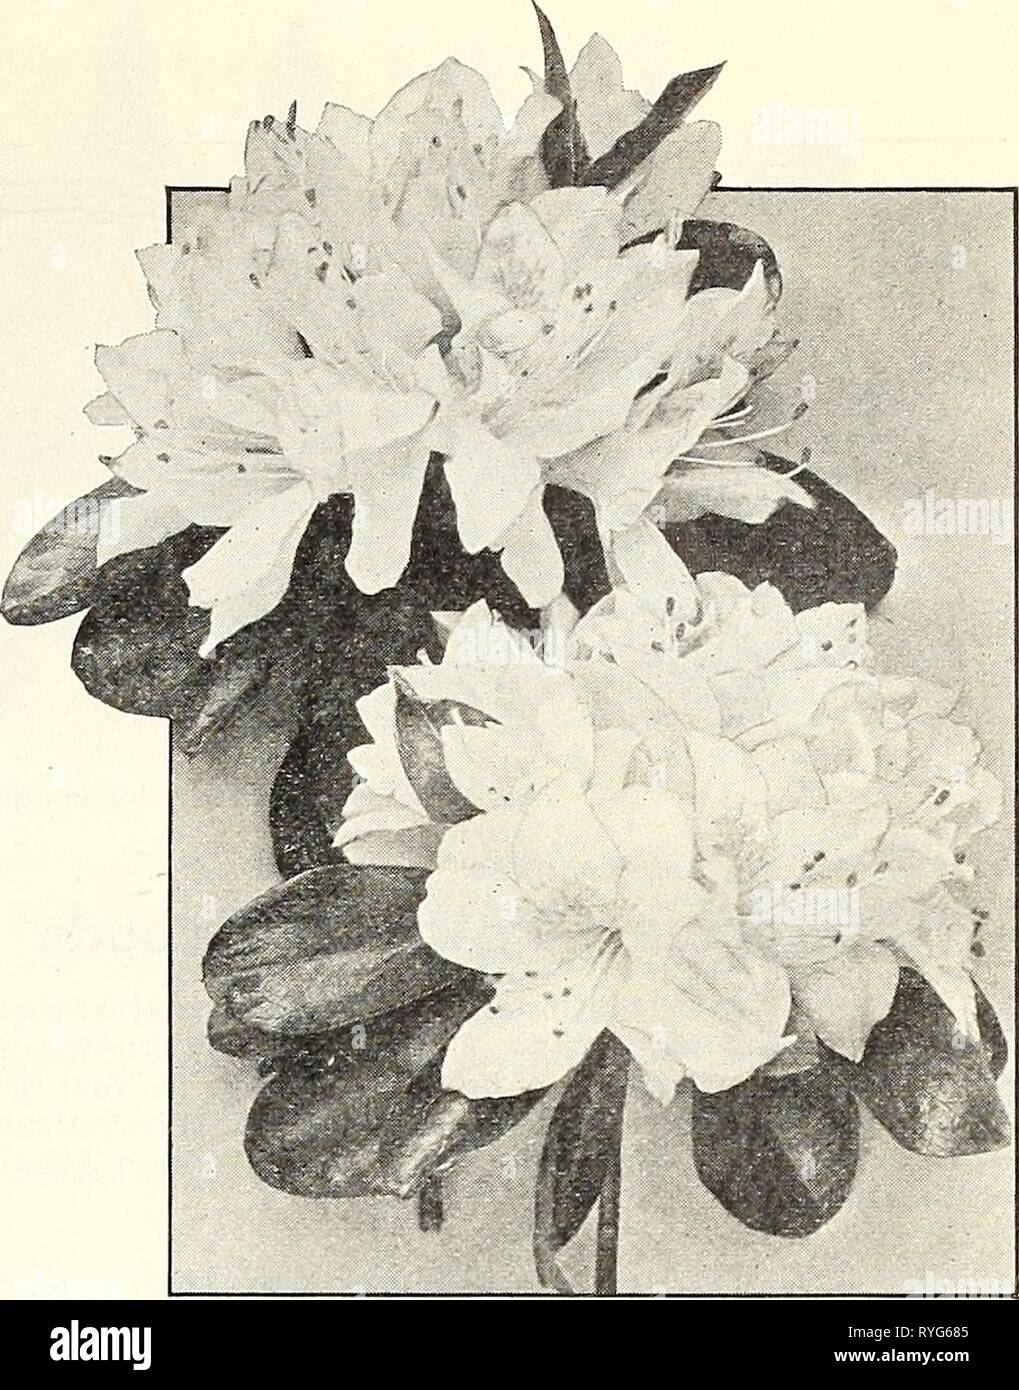 Dreer's wholesale price list : flower seeds for florists plants for florists bulbs for florists vegetable seeds fertilizers, fungicides, insecticides, implements, etc  dreerswholesalep1924henr Year: 1924    Single Tuberous-Rooted Begronia Azalea Kurume Miscellaneous Azaleas Doz. 100 1000 Amcena. 2 14-inch pots, ready April $1 00 $7 OO $60 OO Hinodegiri. 2^4-inch pots, ready April 100 80O 75 00 ' Bushy plants 8 in. in diameter, ready now 10 00 75 00 Ledifolia Alba. 2 -inch pots, ready April 150 1000 ' Magnifica. 2 V4-inch pots, ready April 150 10 00 Macrantha. 2-inch pots, ready April 125 8 00  Stock Photo